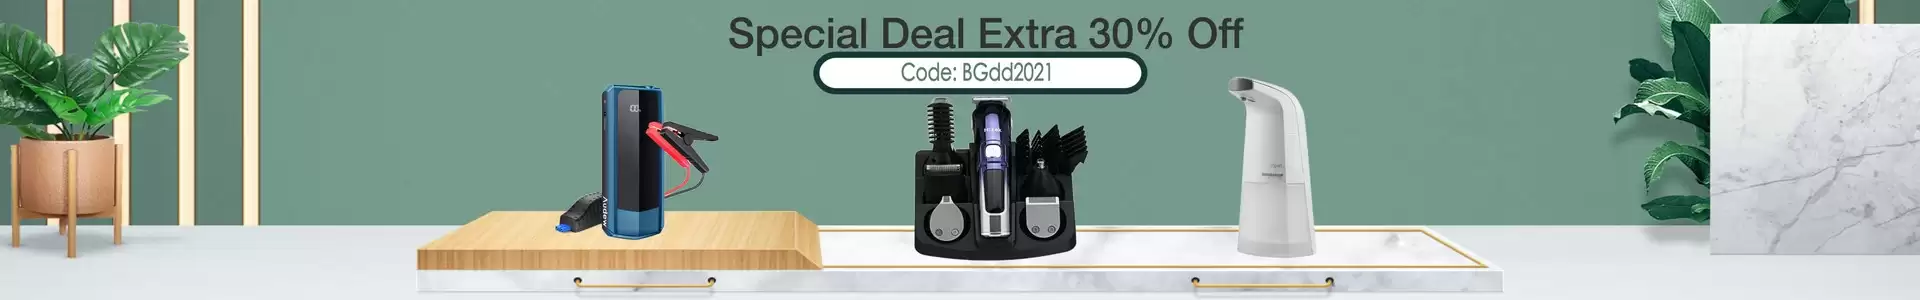 Get Extra 30% Off On Tools And Health Care Items With This Discount Coupon At Banggood